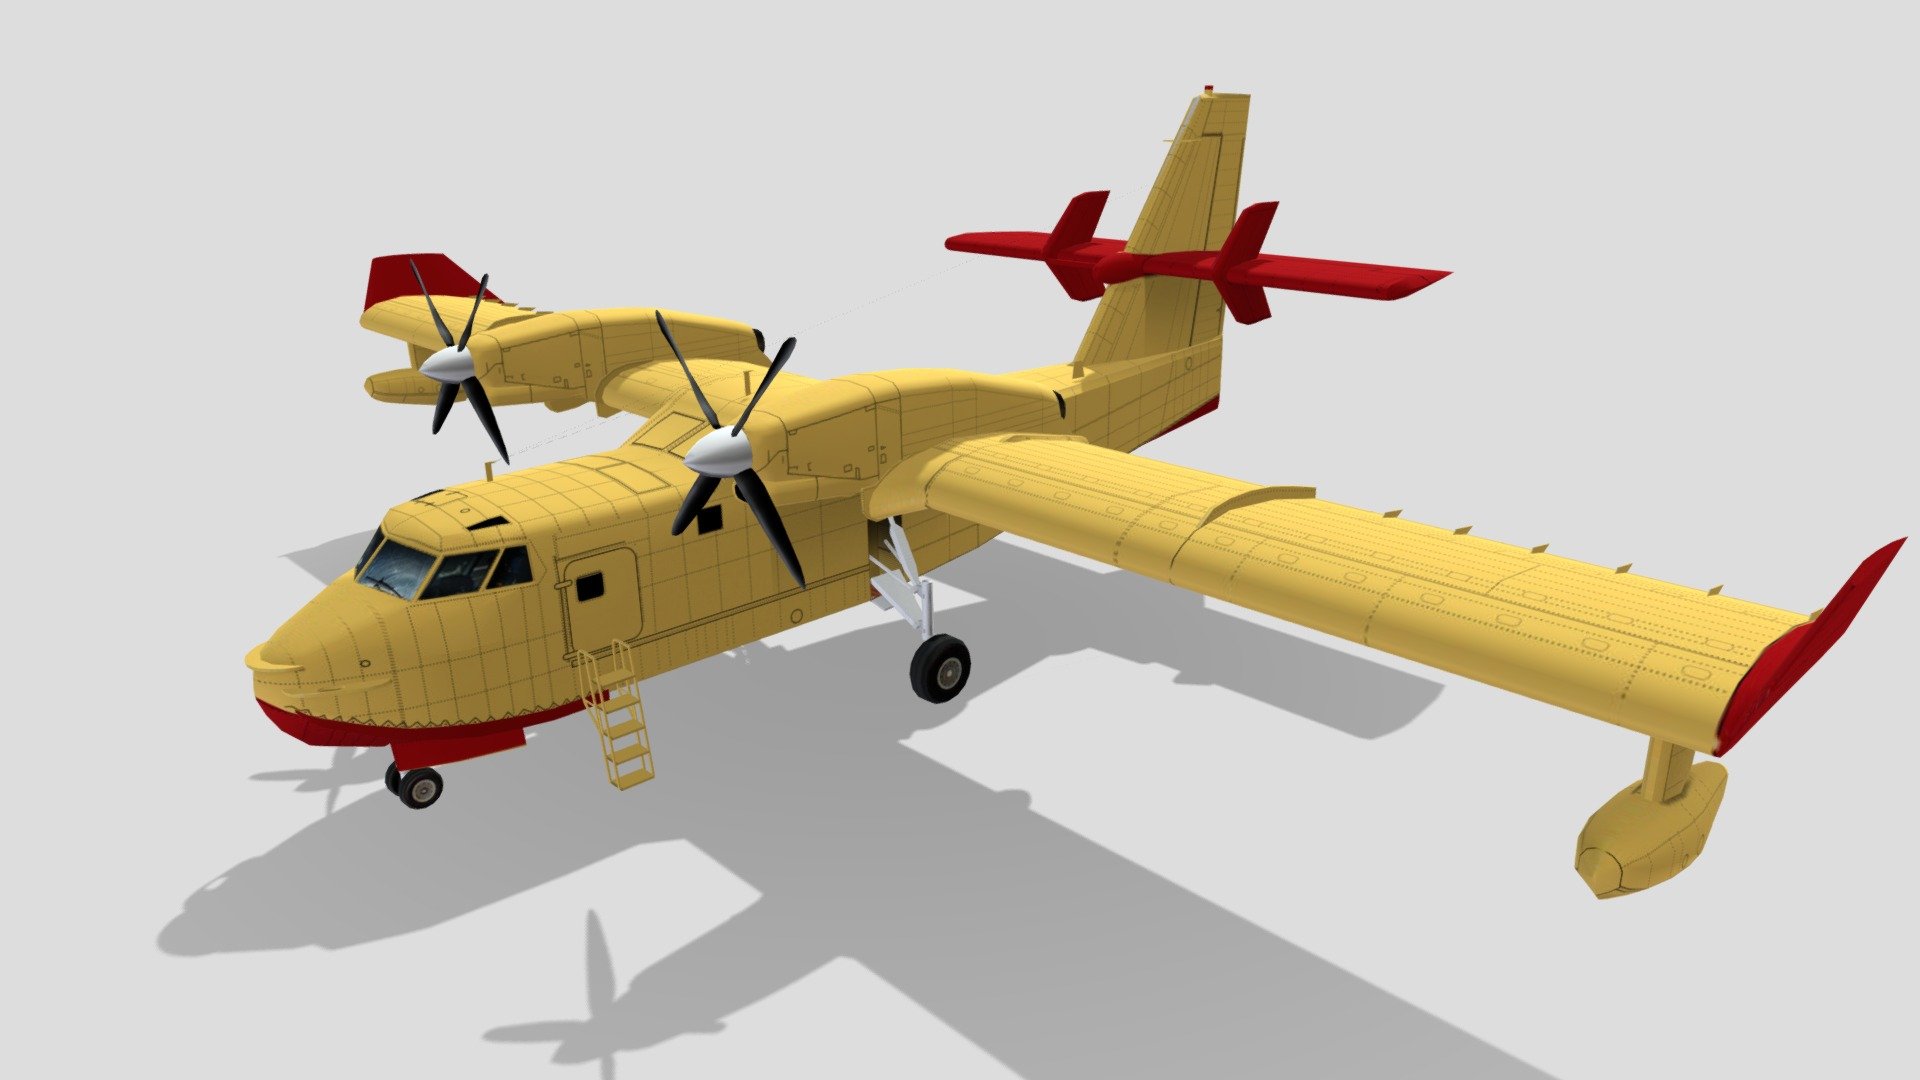 The Canadair CL-415 (Super Scooper, later Bombardier 415) and the De Havilland Canada DHC-515 are a series of amphibious aircraft built originally by Canadair and subsequently by Bombardier and Viking Air, and De Havilland Canada. The CL-415 is based on the Canadair CL-215 and is designed specifically for aerial firefighting; it can perform various other roles, such as search and rescue and utility transport.

3D low-poly model of a Canadair CL-415,, optimized for minimal complexity with less than 5000 polygons. Despite its low polygon count, the model accurately captures the iconic design and aerodynamic features of the IAI Arava, making it ideal for real-time rendering in games or simulations. The model comes with a blank 2048x2048 layered texture, providing a clean slate for customization. This allows you to apply your own color schemes, or decals 3d model